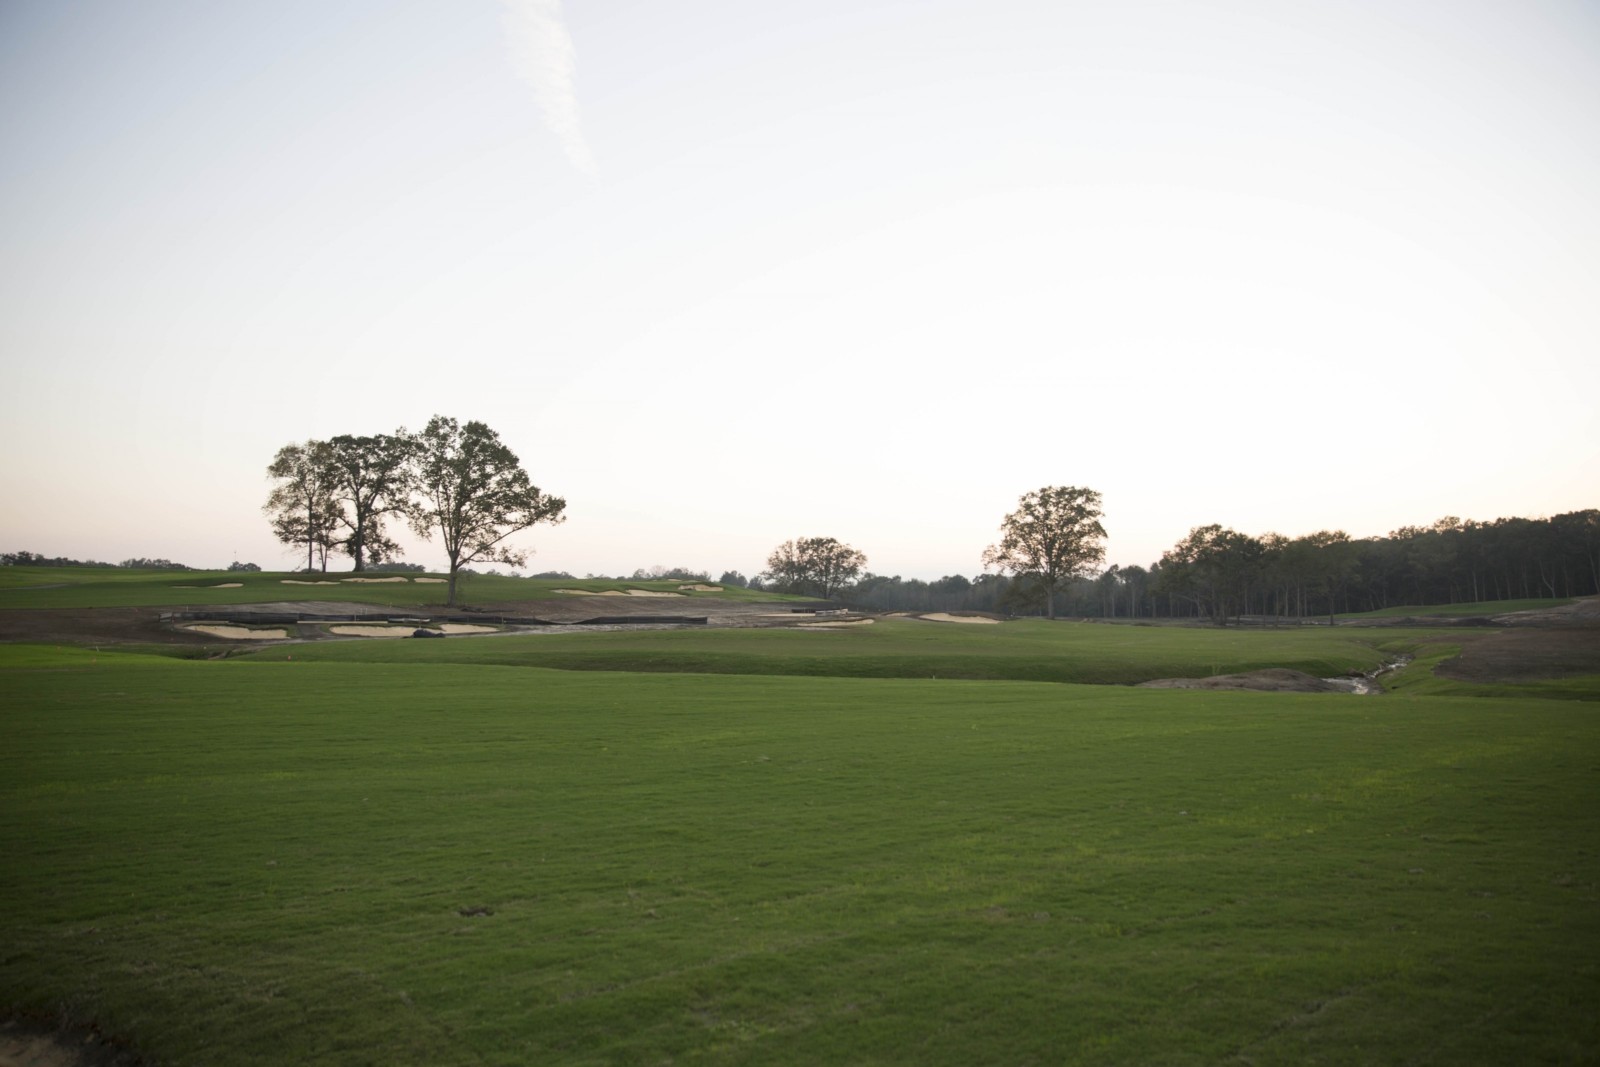 Mossy Oak Golf Club - Nature_s Golf located in West Point